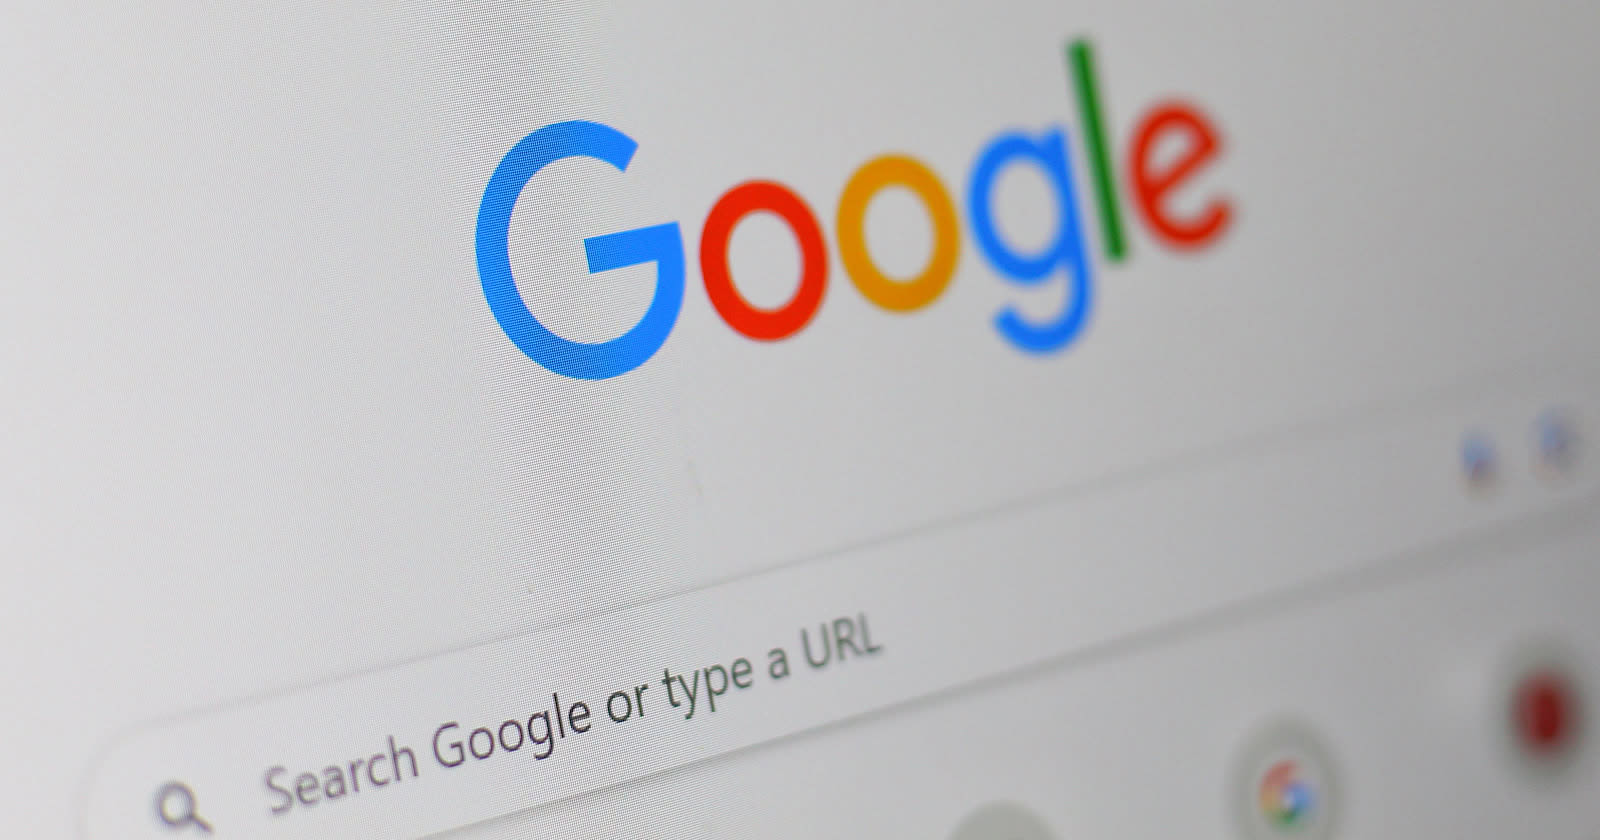 Google Clarifies Autocomplete Functionality Amid User Concerns